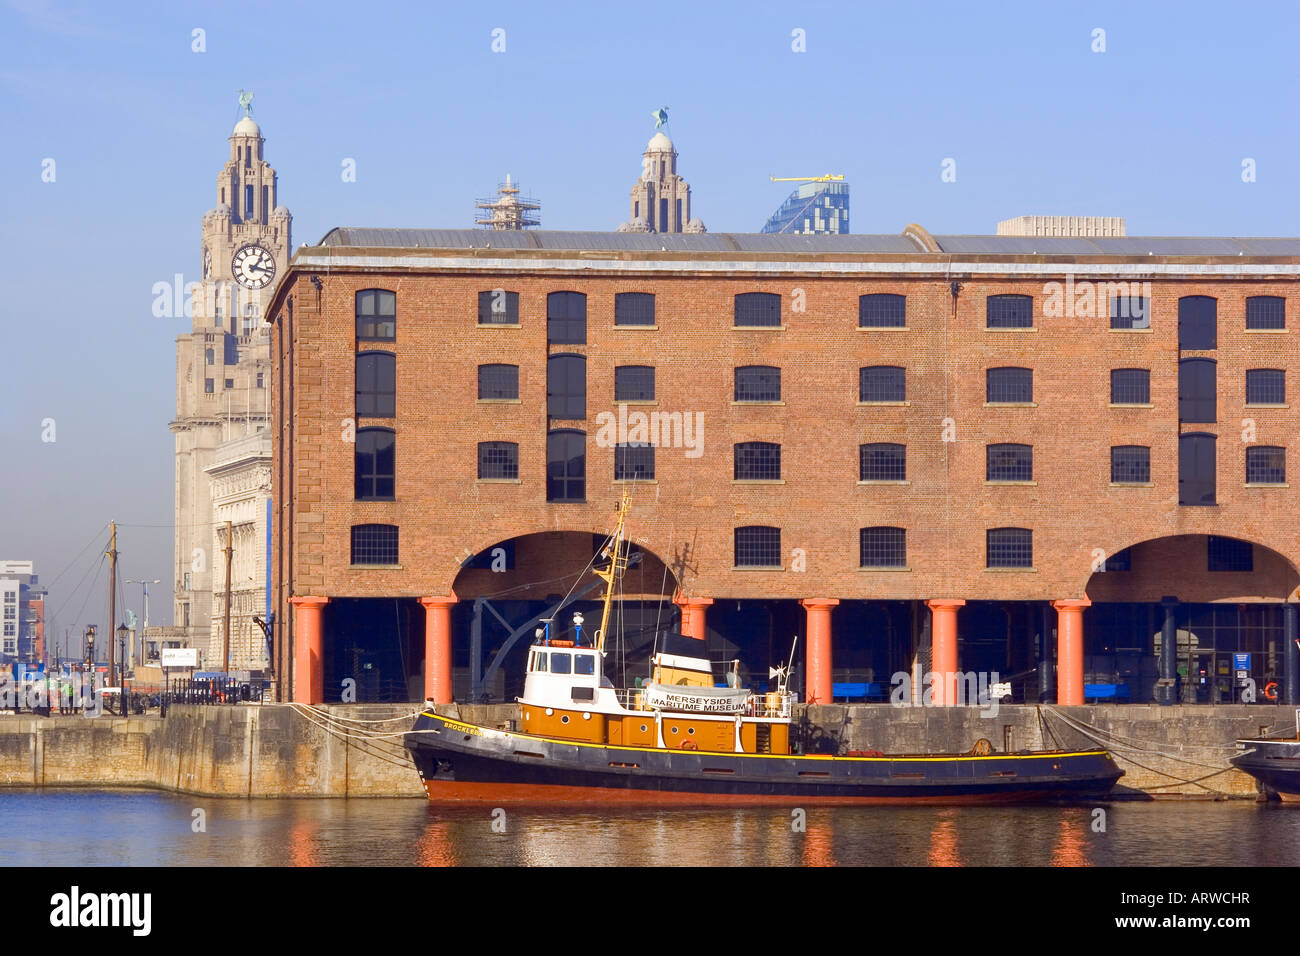 Liverpool home of The Beatles ALBERT DOCK ON THE MERSEY RIVER IN LIVERPOOL ENGLAND Stock Photo